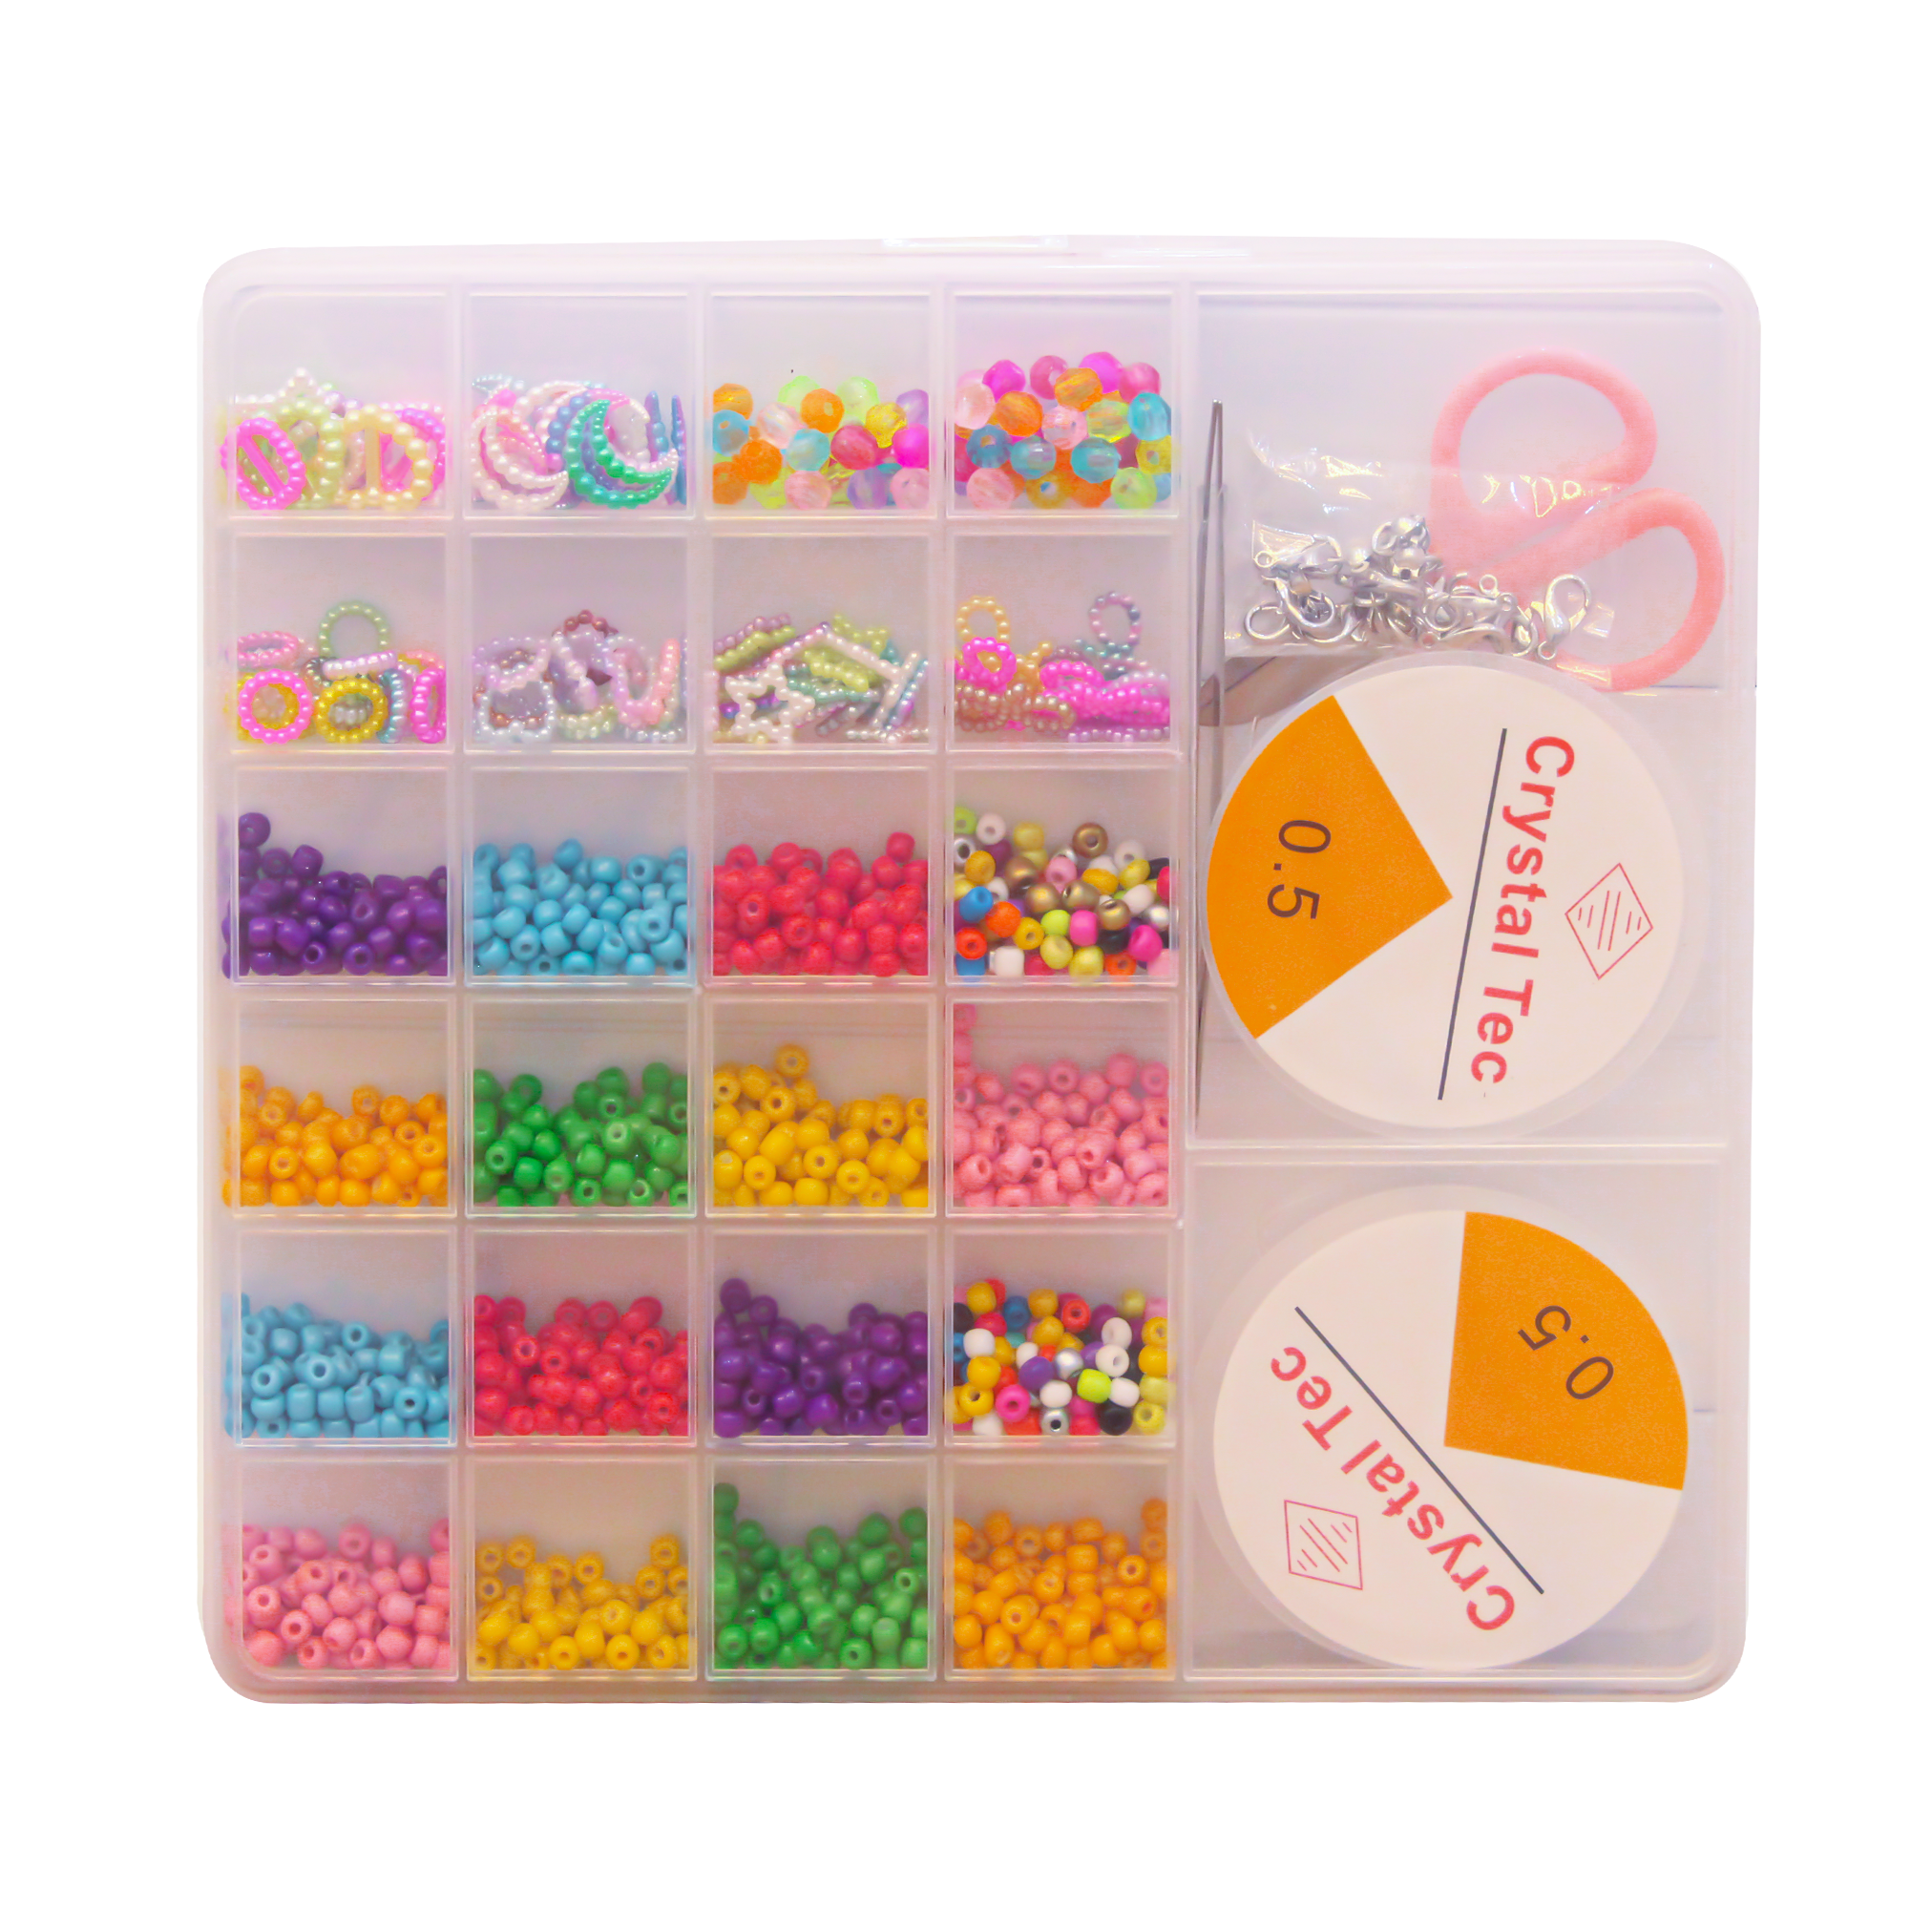 Bracelet Making Box with 0.5 Crystal tec